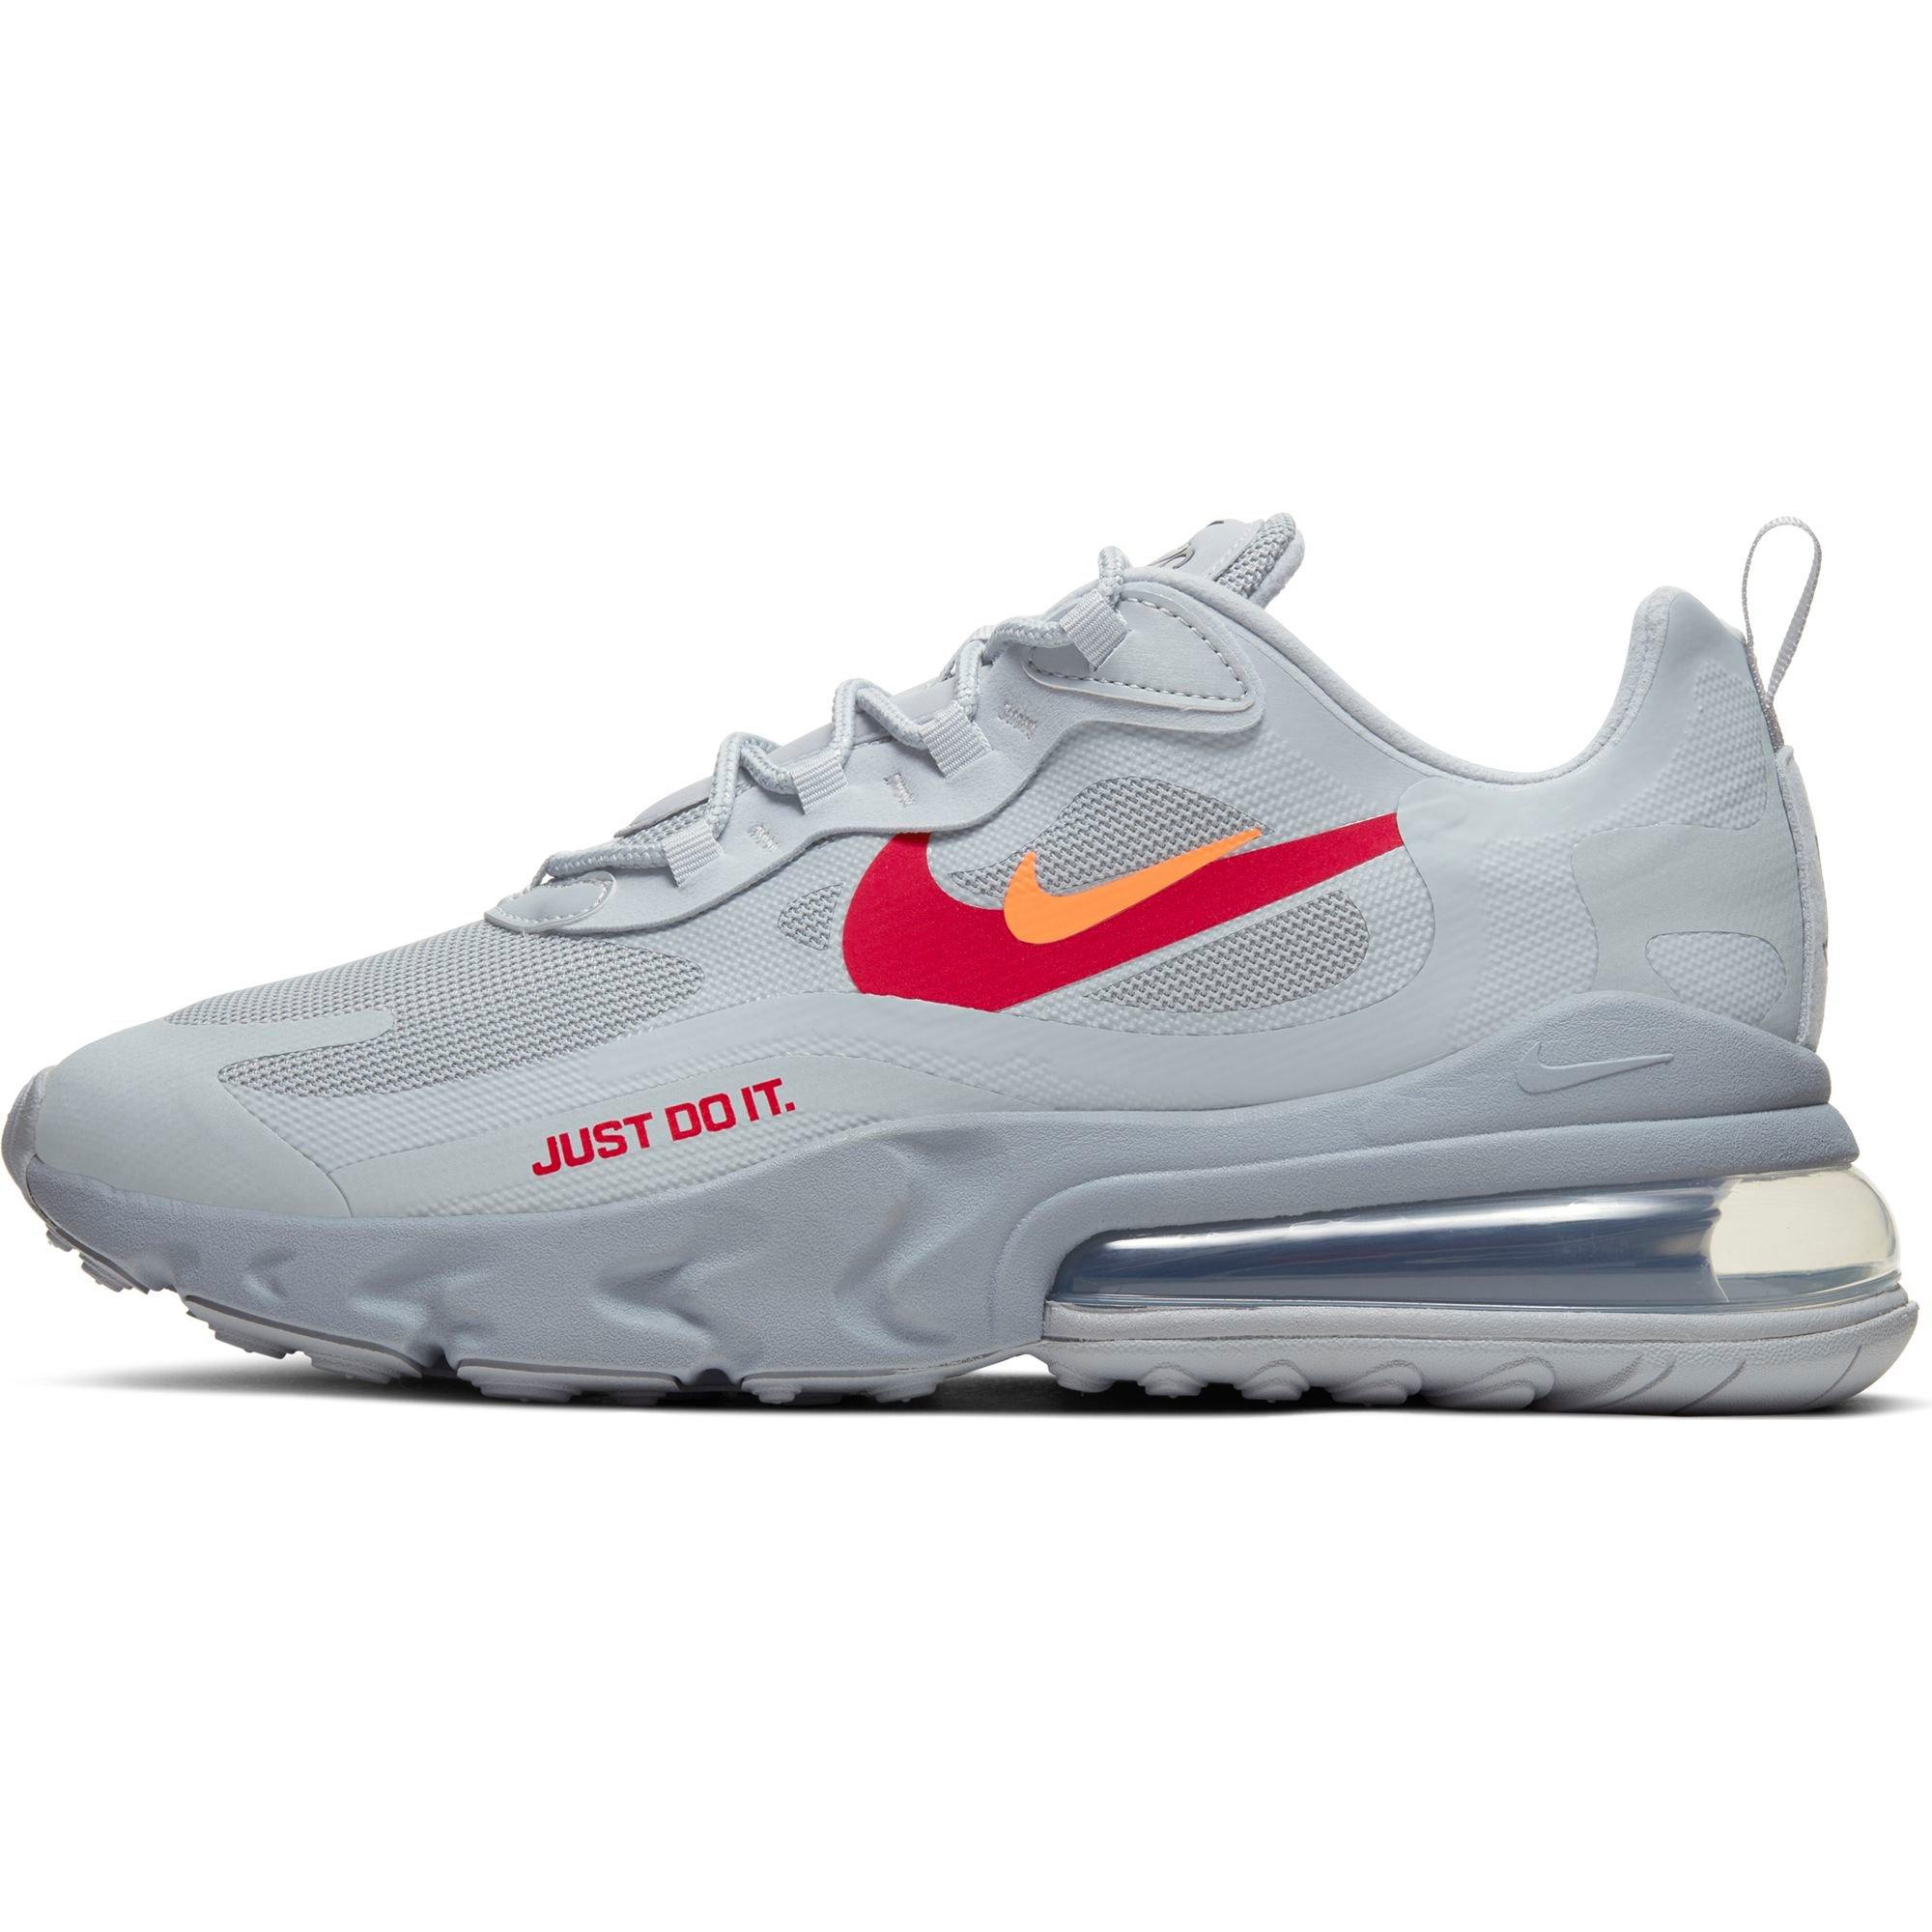 nike 270 grey and red